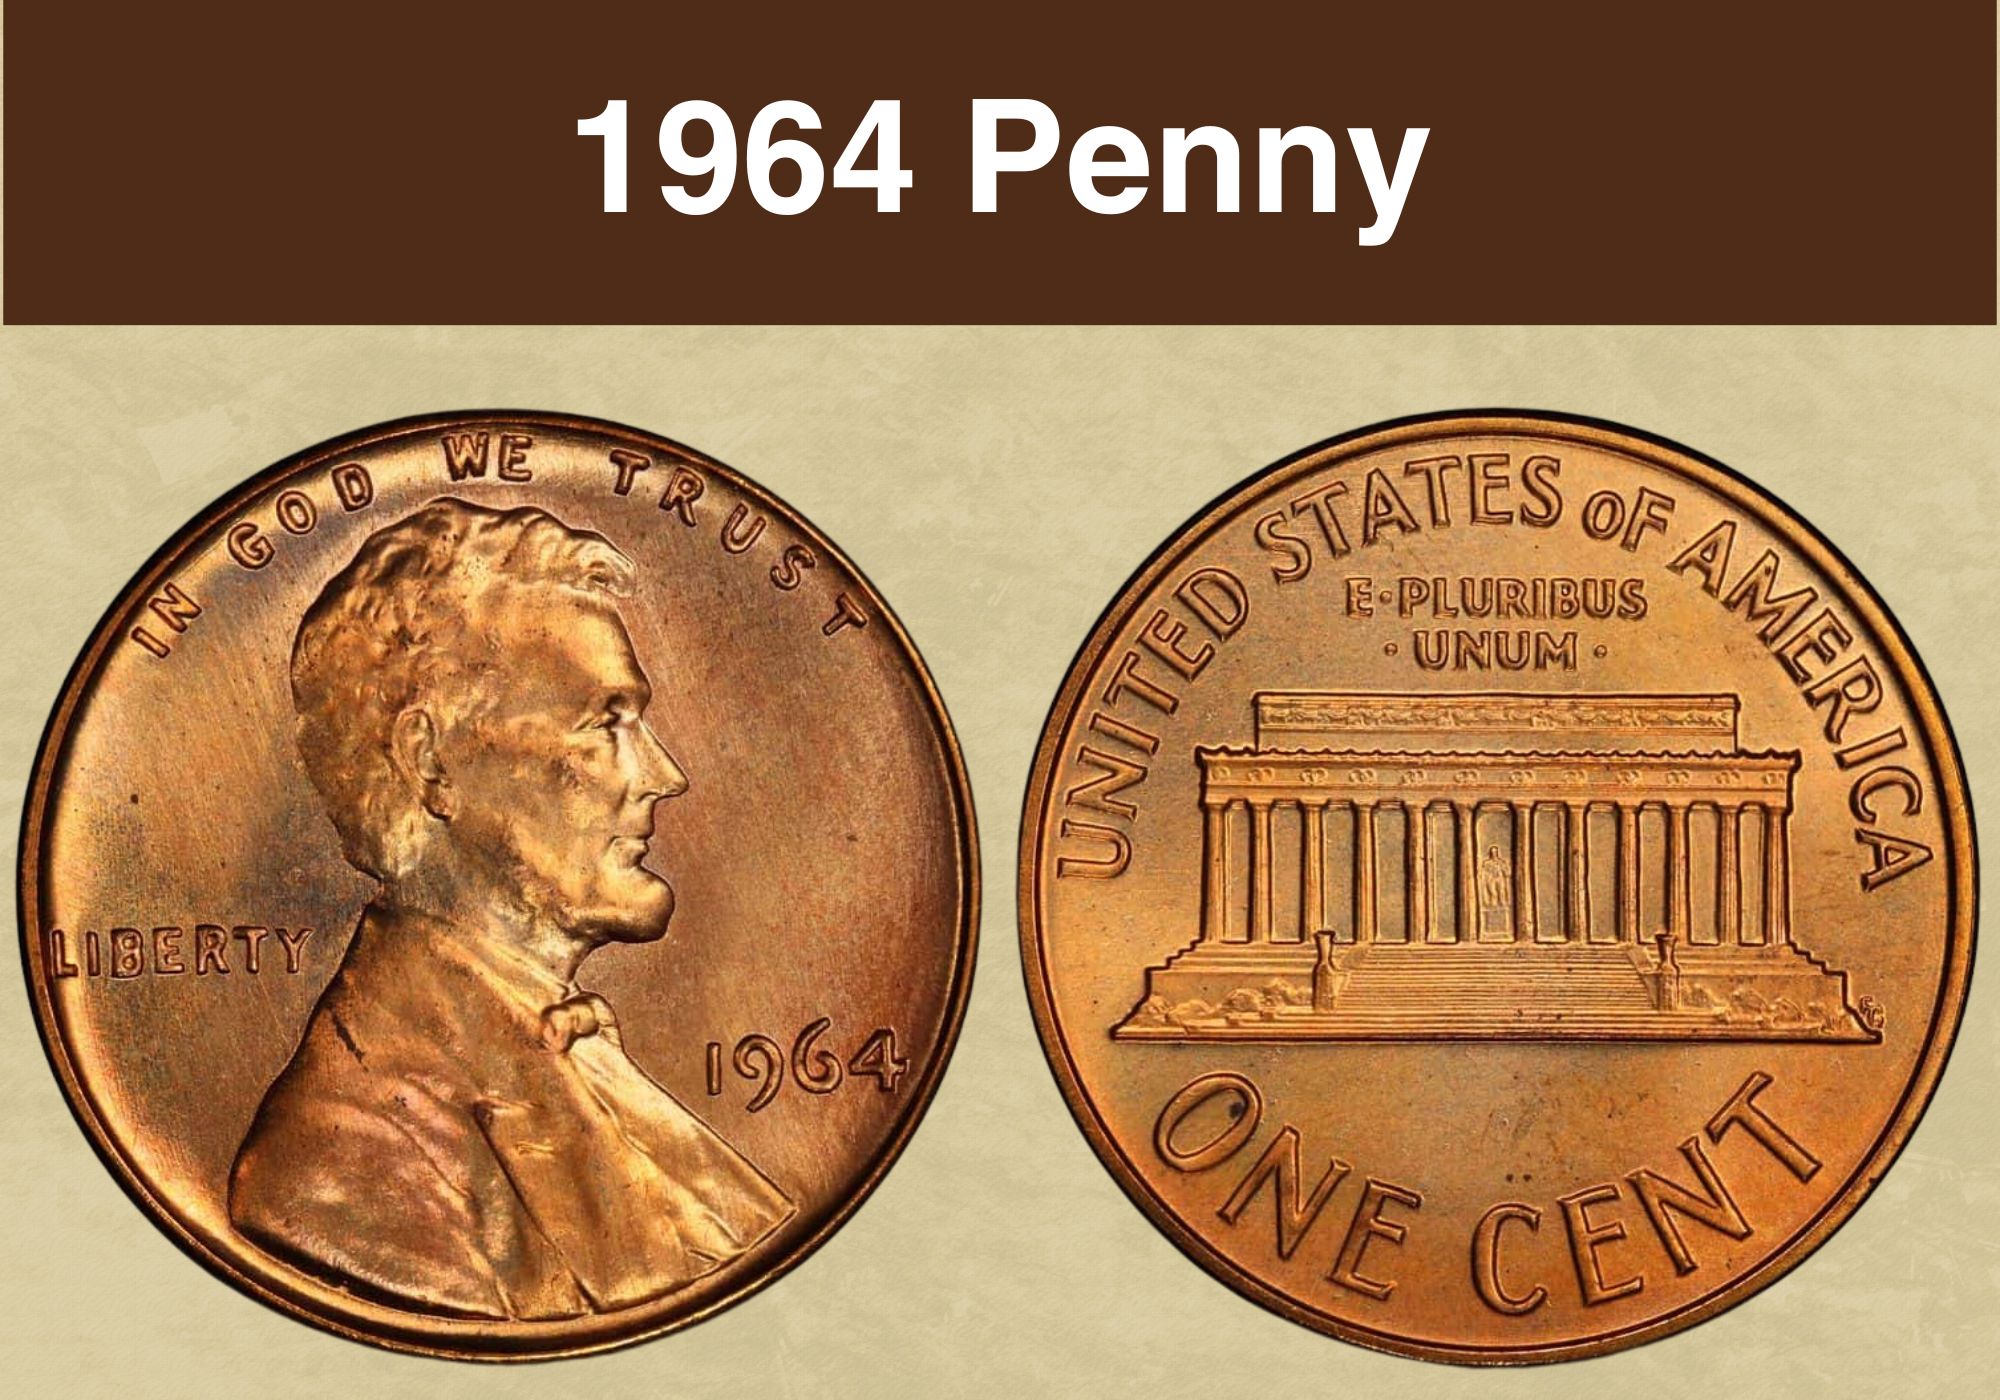 i'm the best ! “, Penny icon